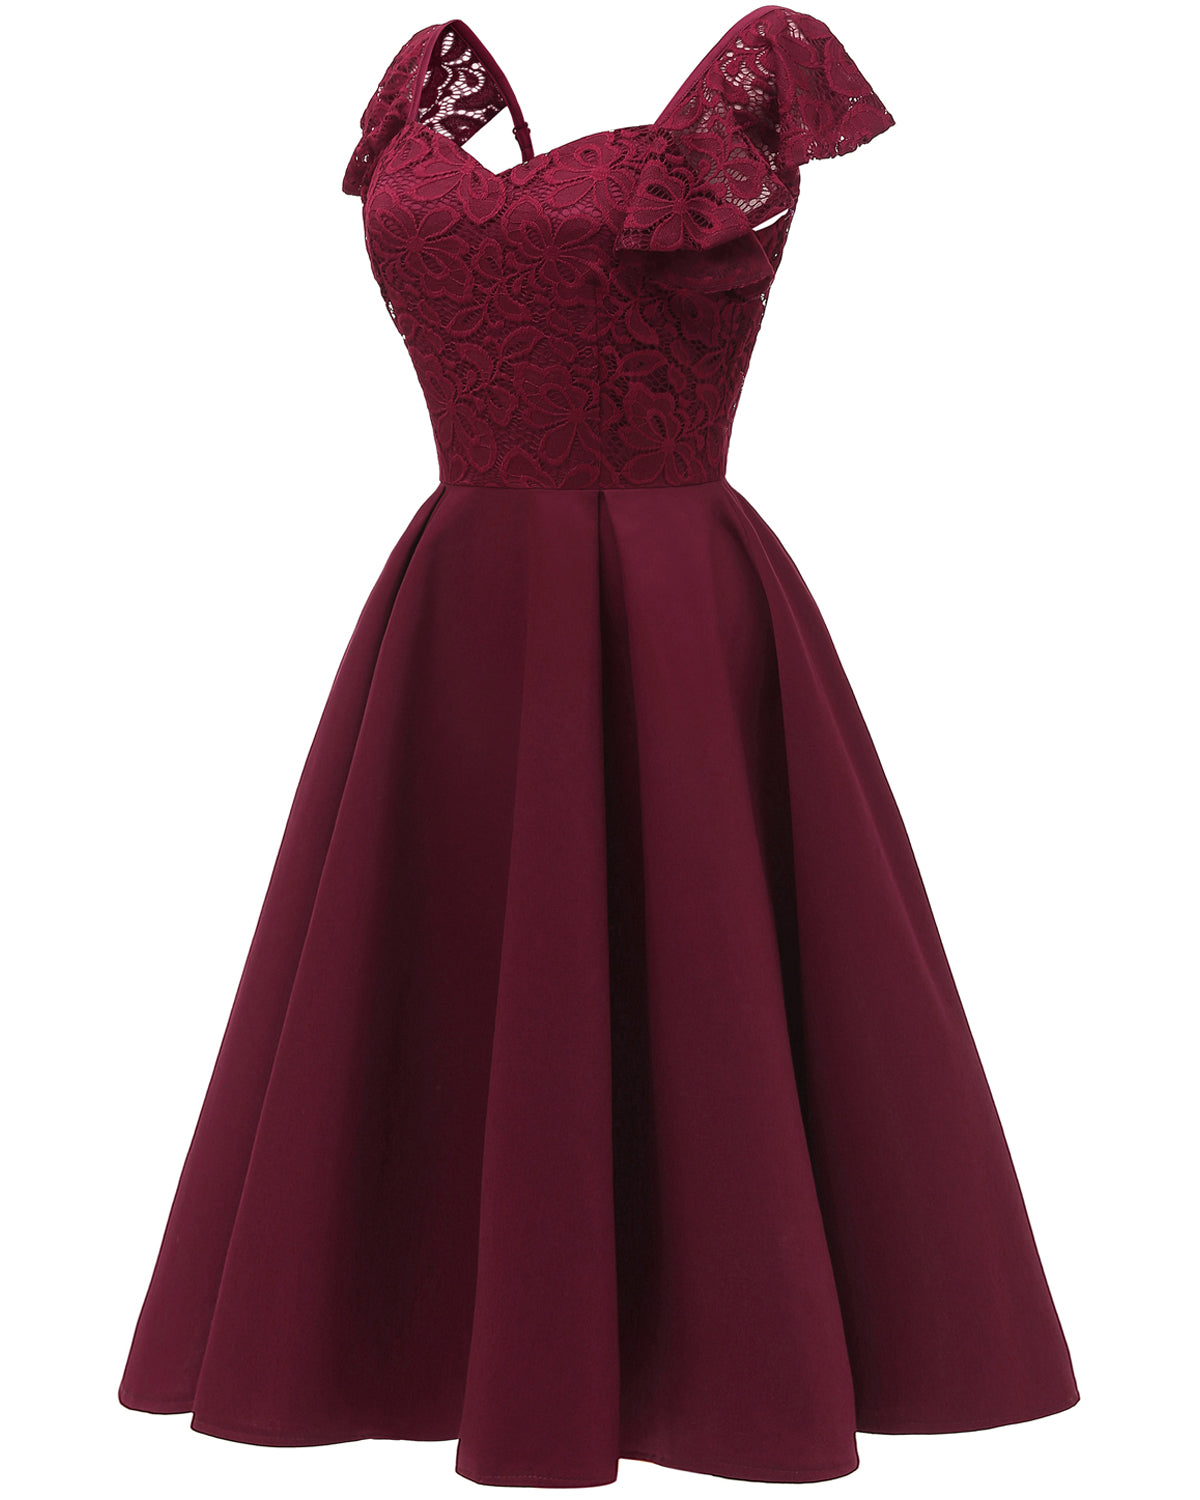 Luscious Short Maroon Prom Dress with Ruffle Straps Vintage 50s Short Bridesmaid Dresses 1626B-Dolly Gown